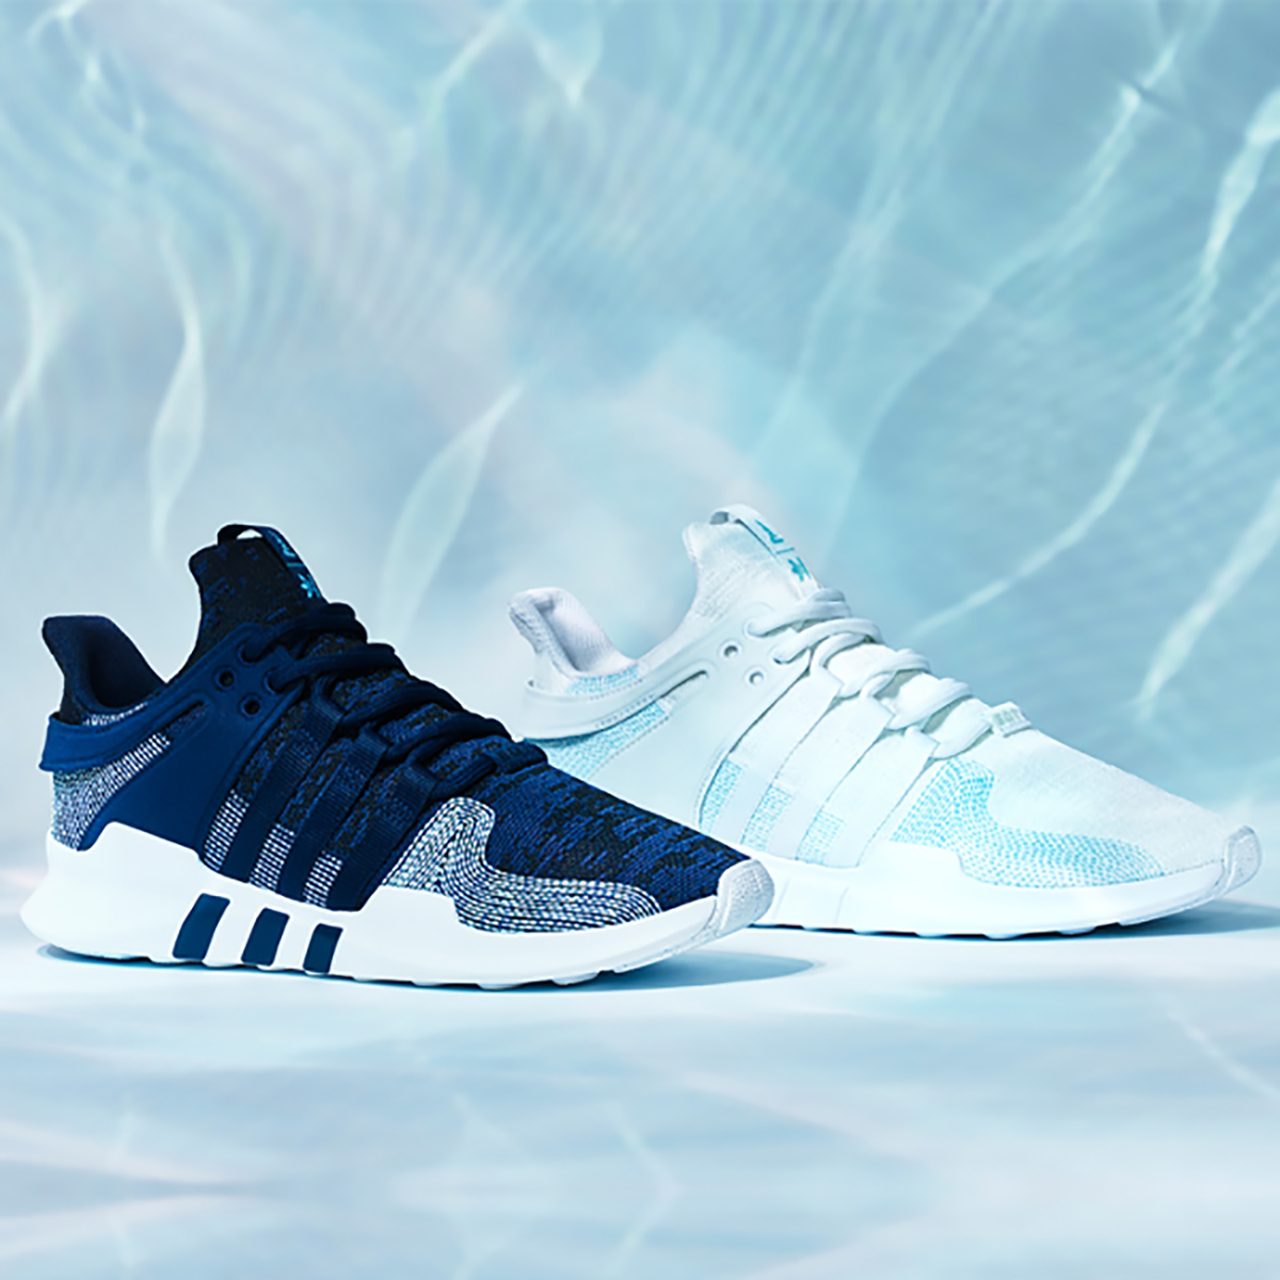 Adidas EQT Collection 